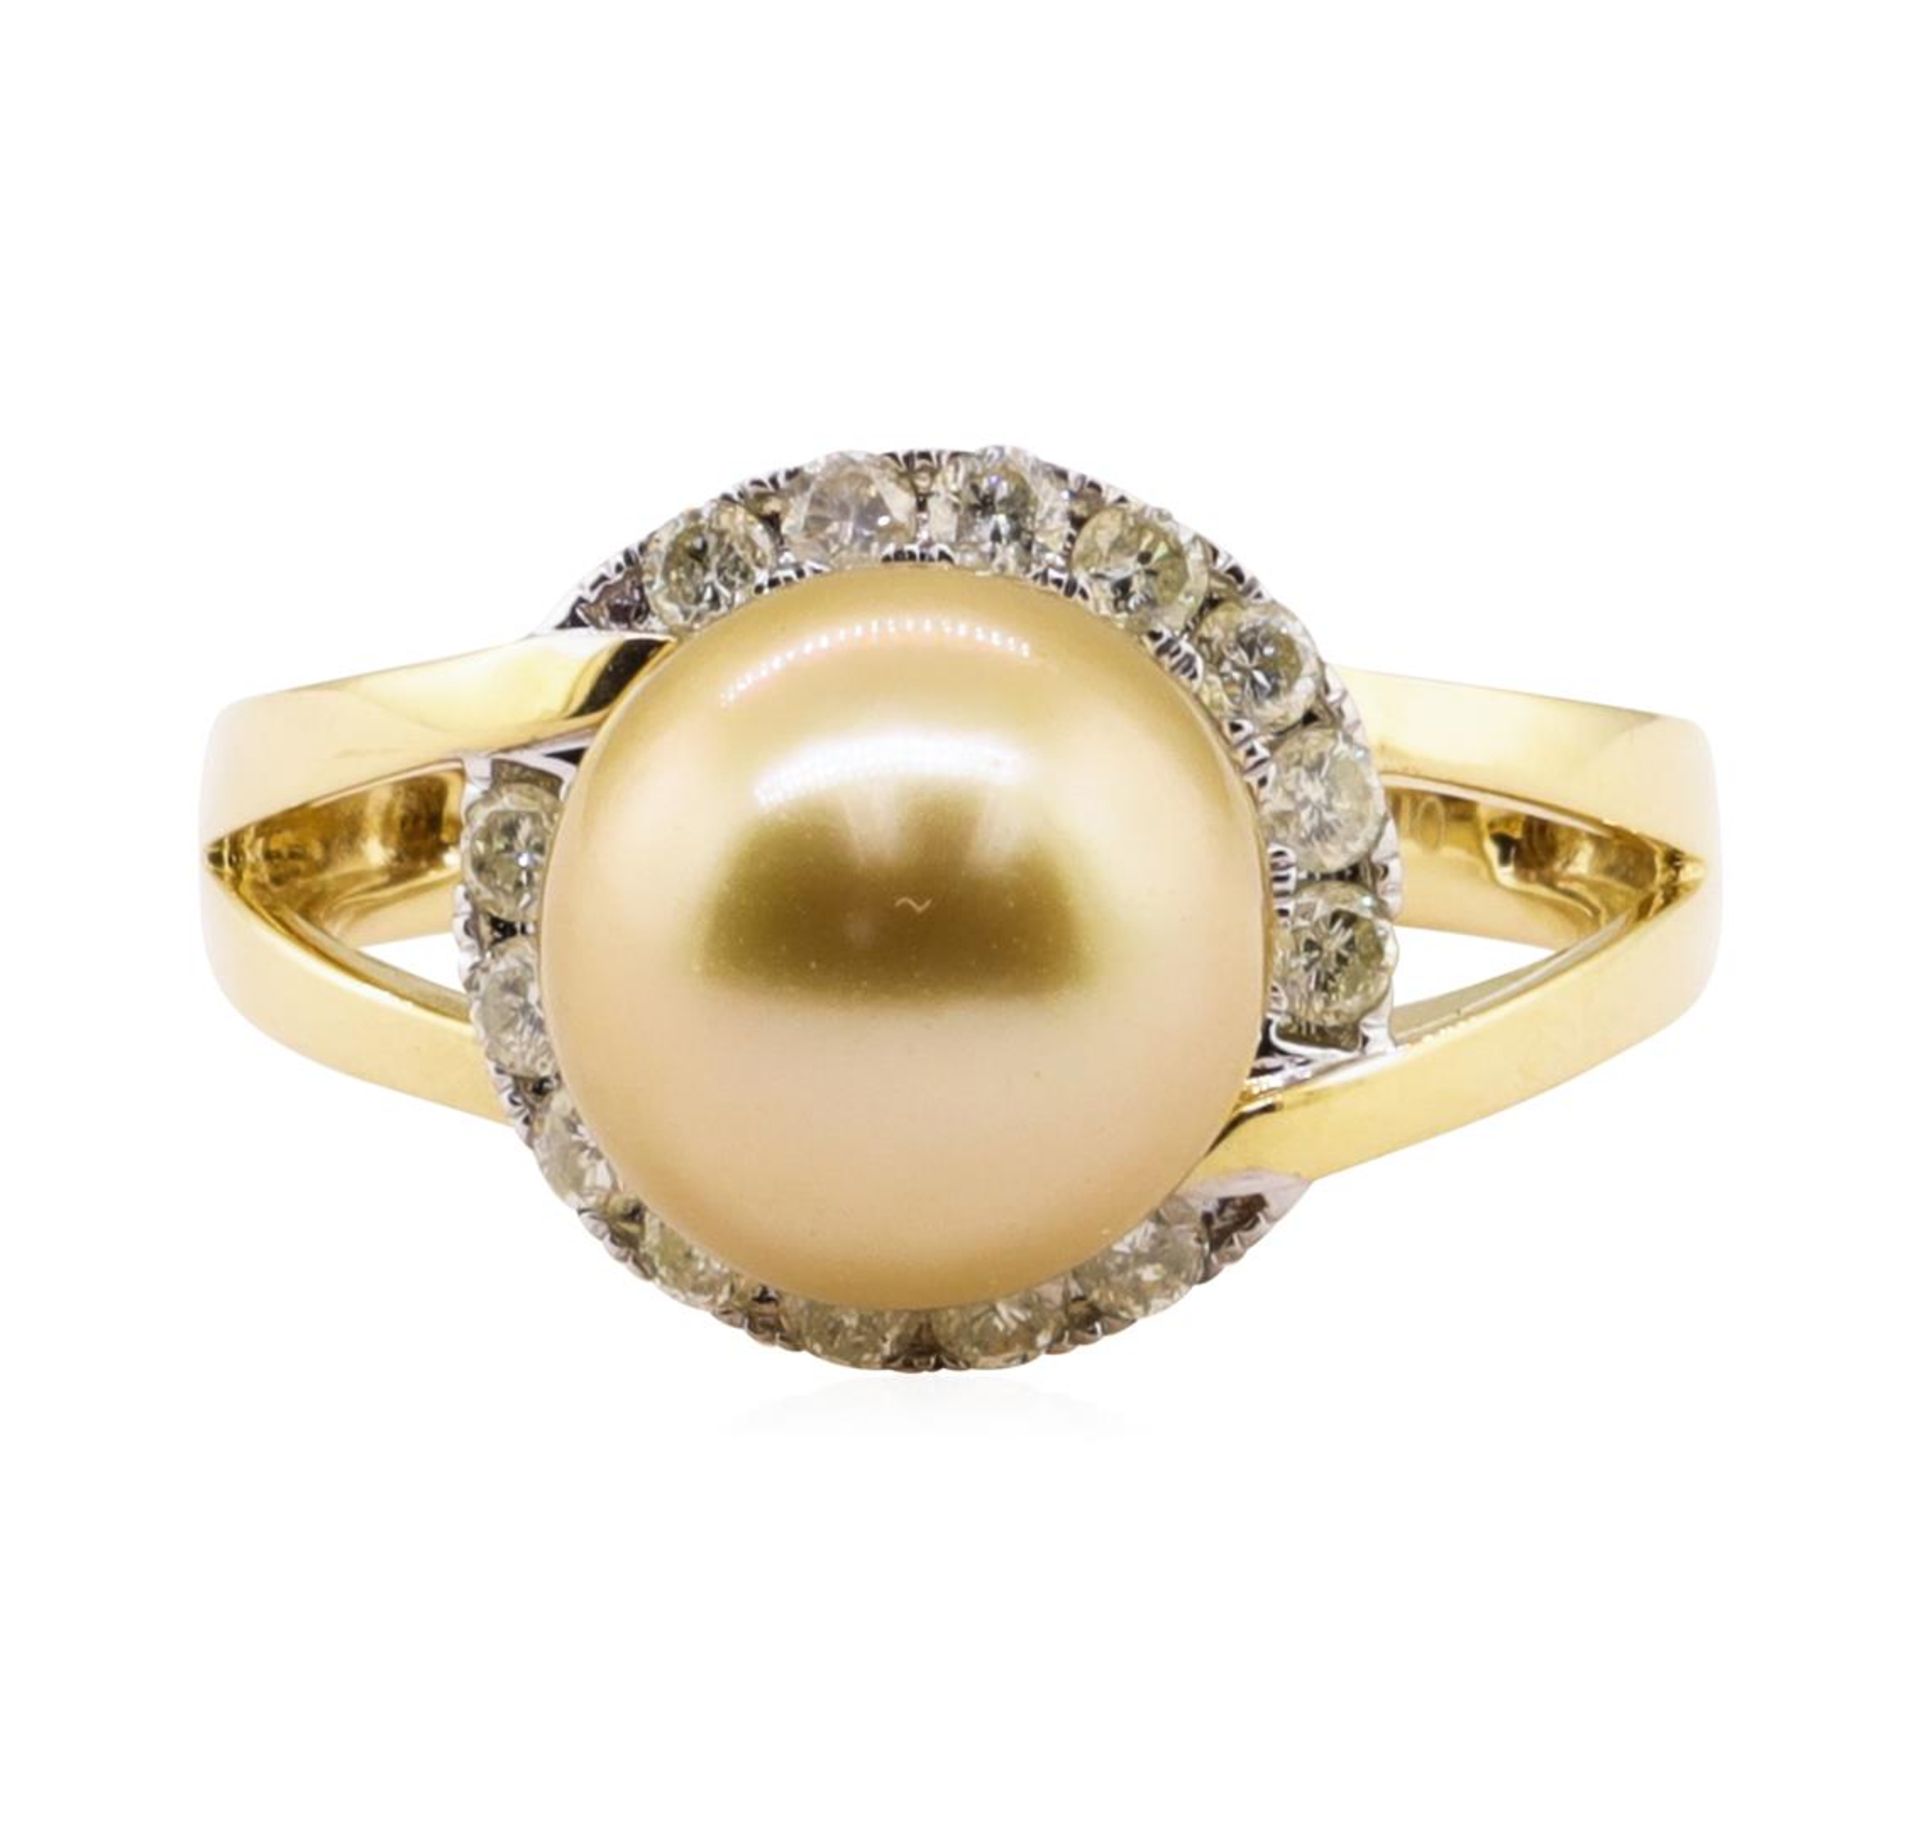 South Sea Pearl and Diamond Ring - 18KT Yellow Gold